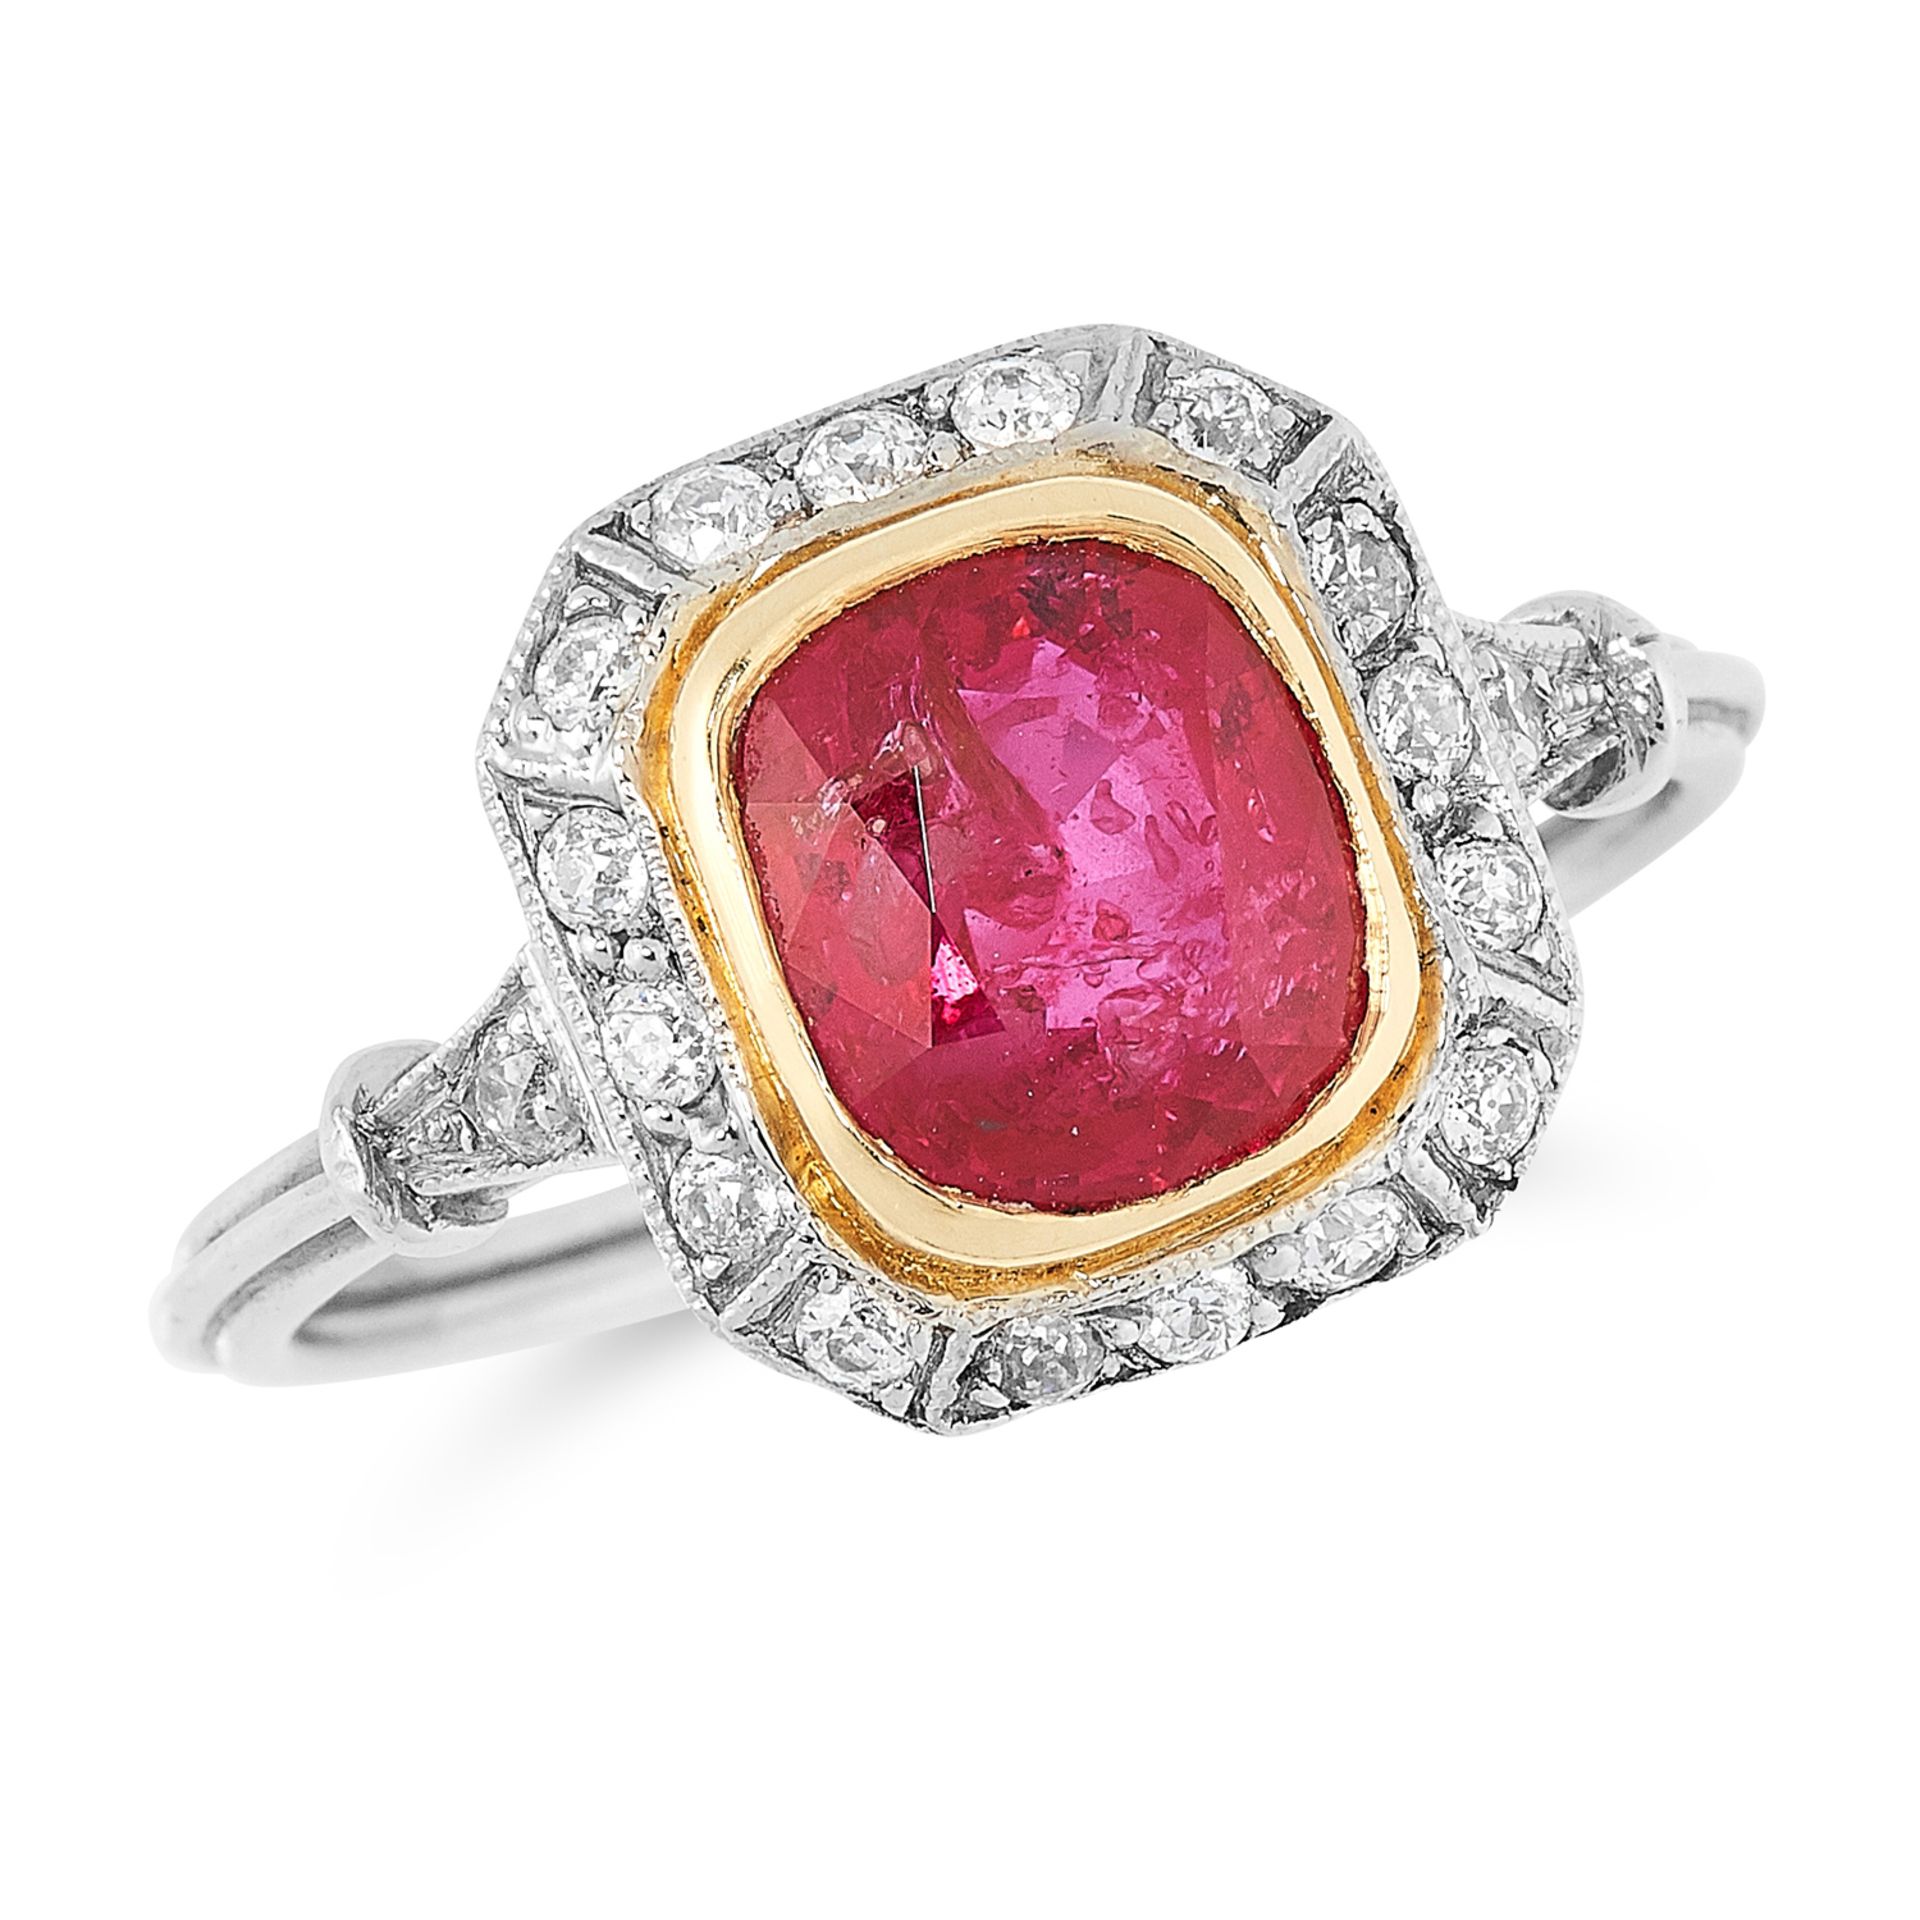 A 2.33 CARAT BURMA NO HEAT RUBY AND DIAMOND CLUSTER RING set with a cushion cut ruby of 2.33